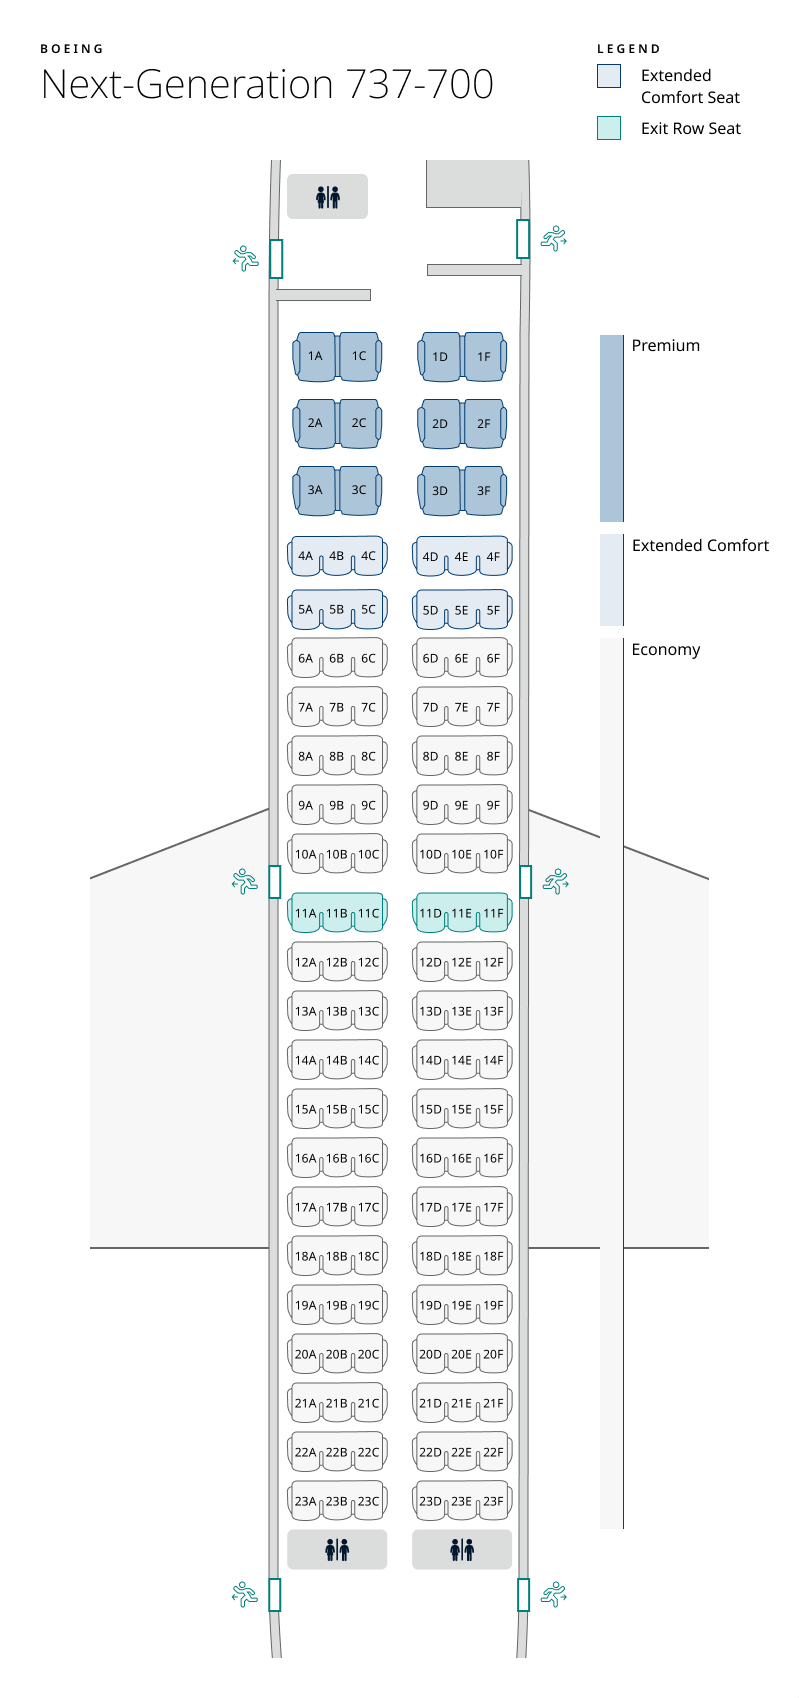 Seat map of 737-700. Seat information available in table below